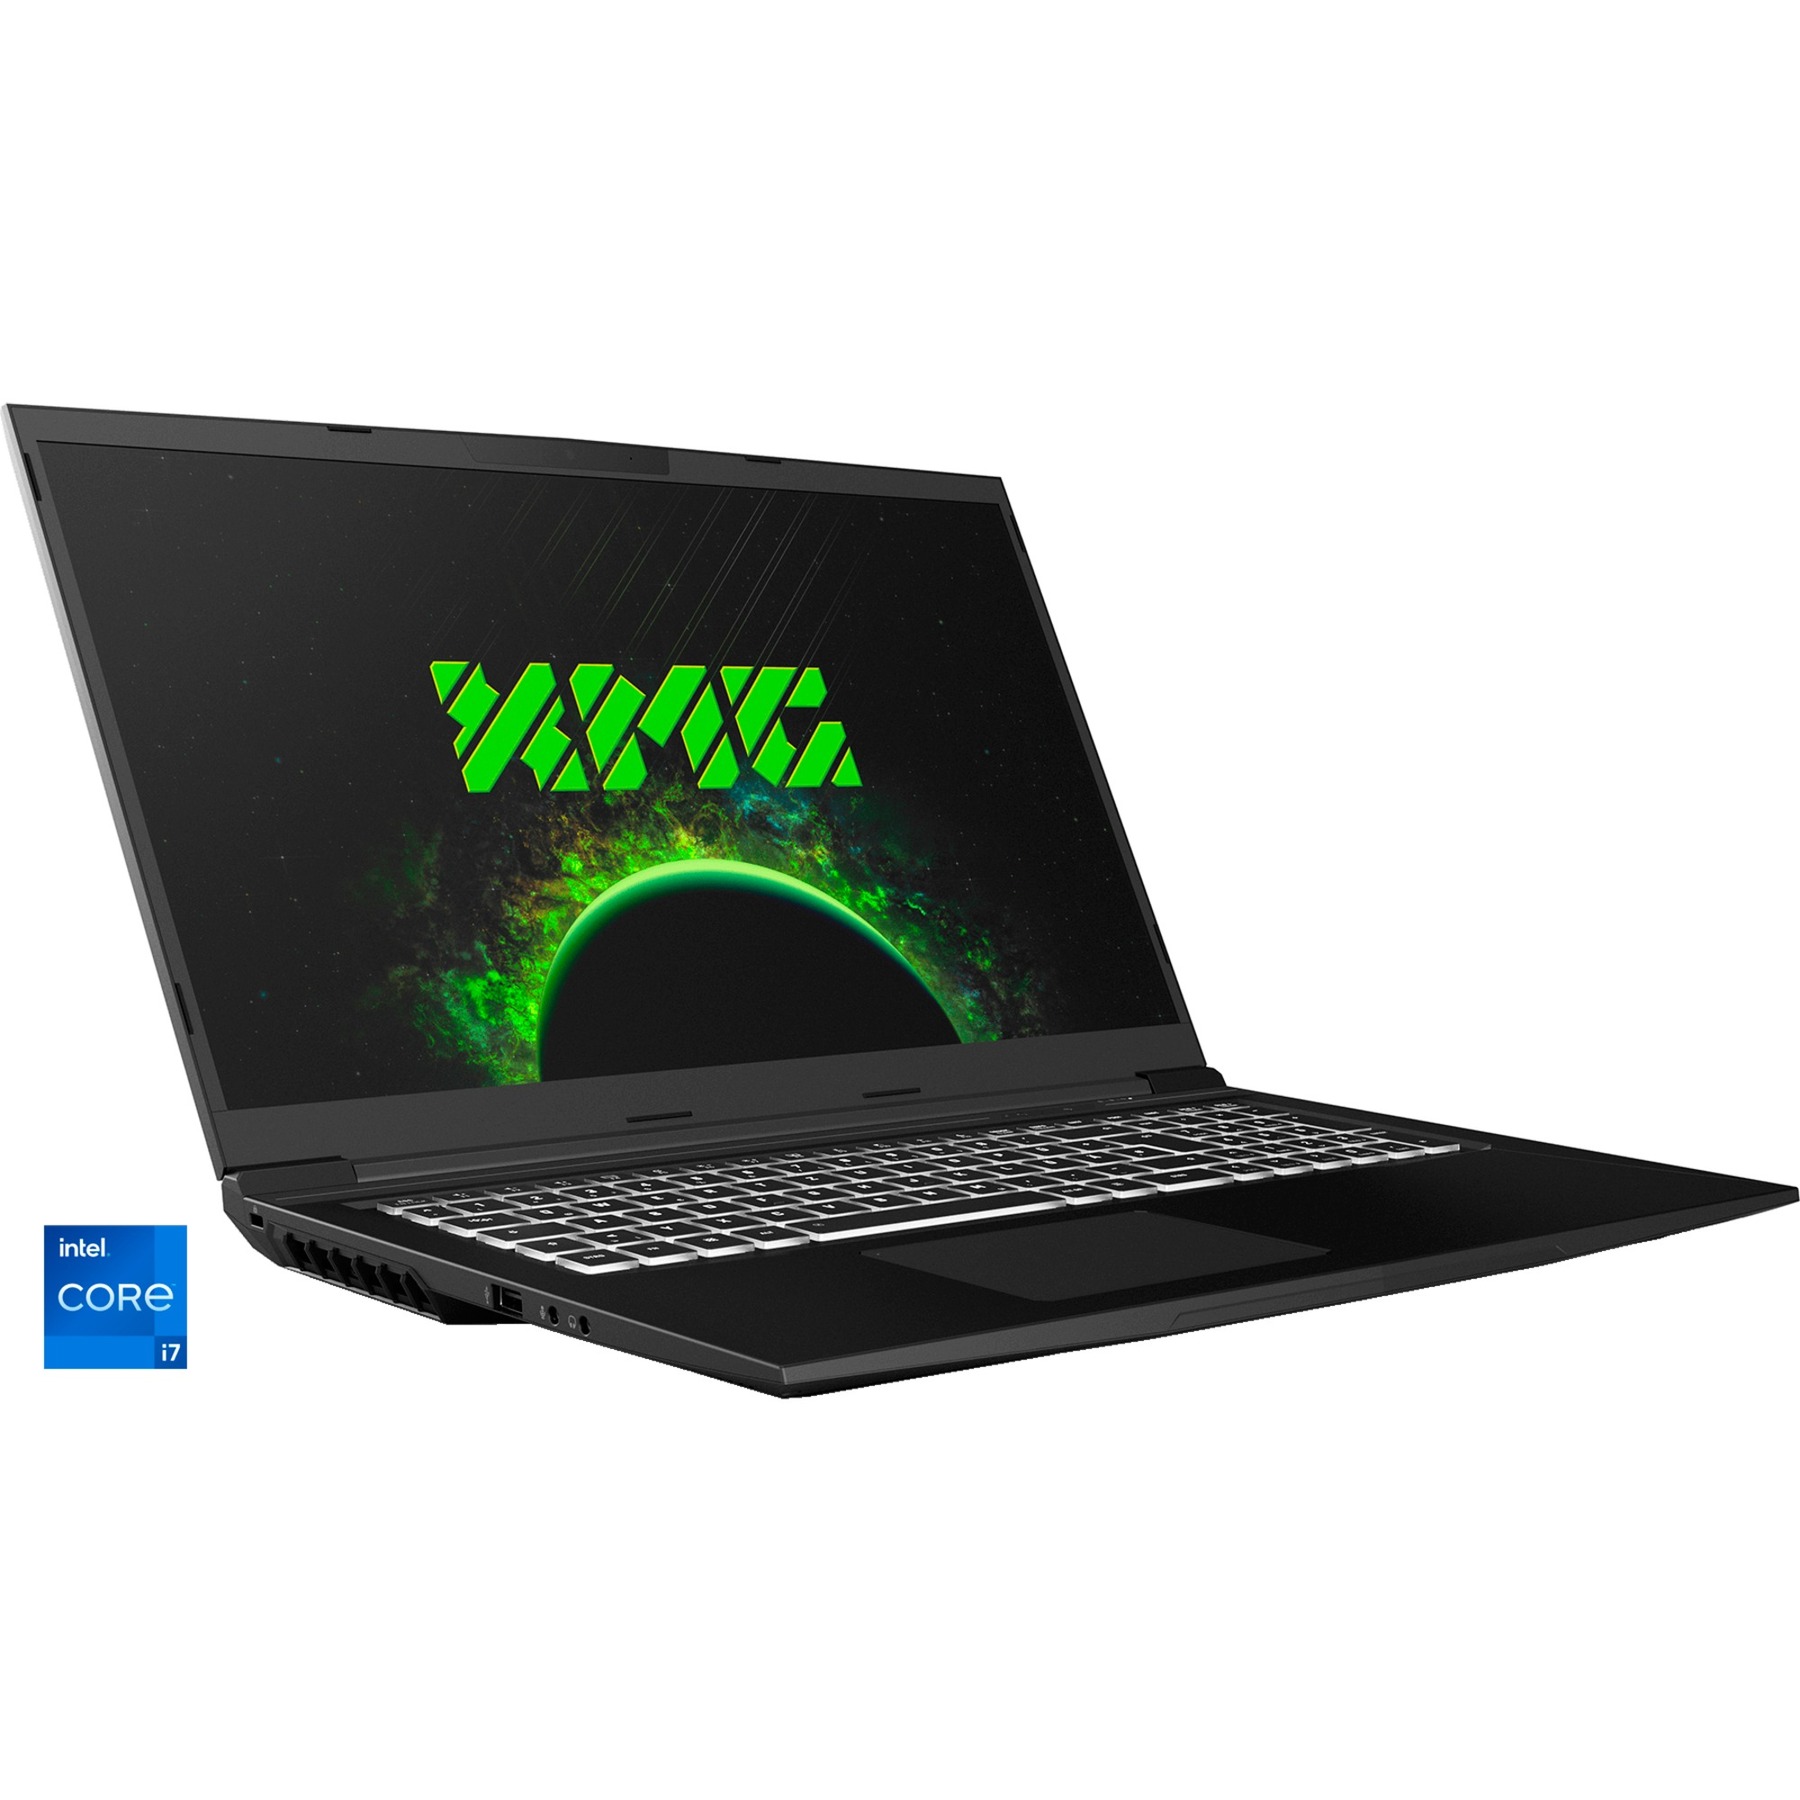 CORE 17 (10505861), Gaming-Notebook